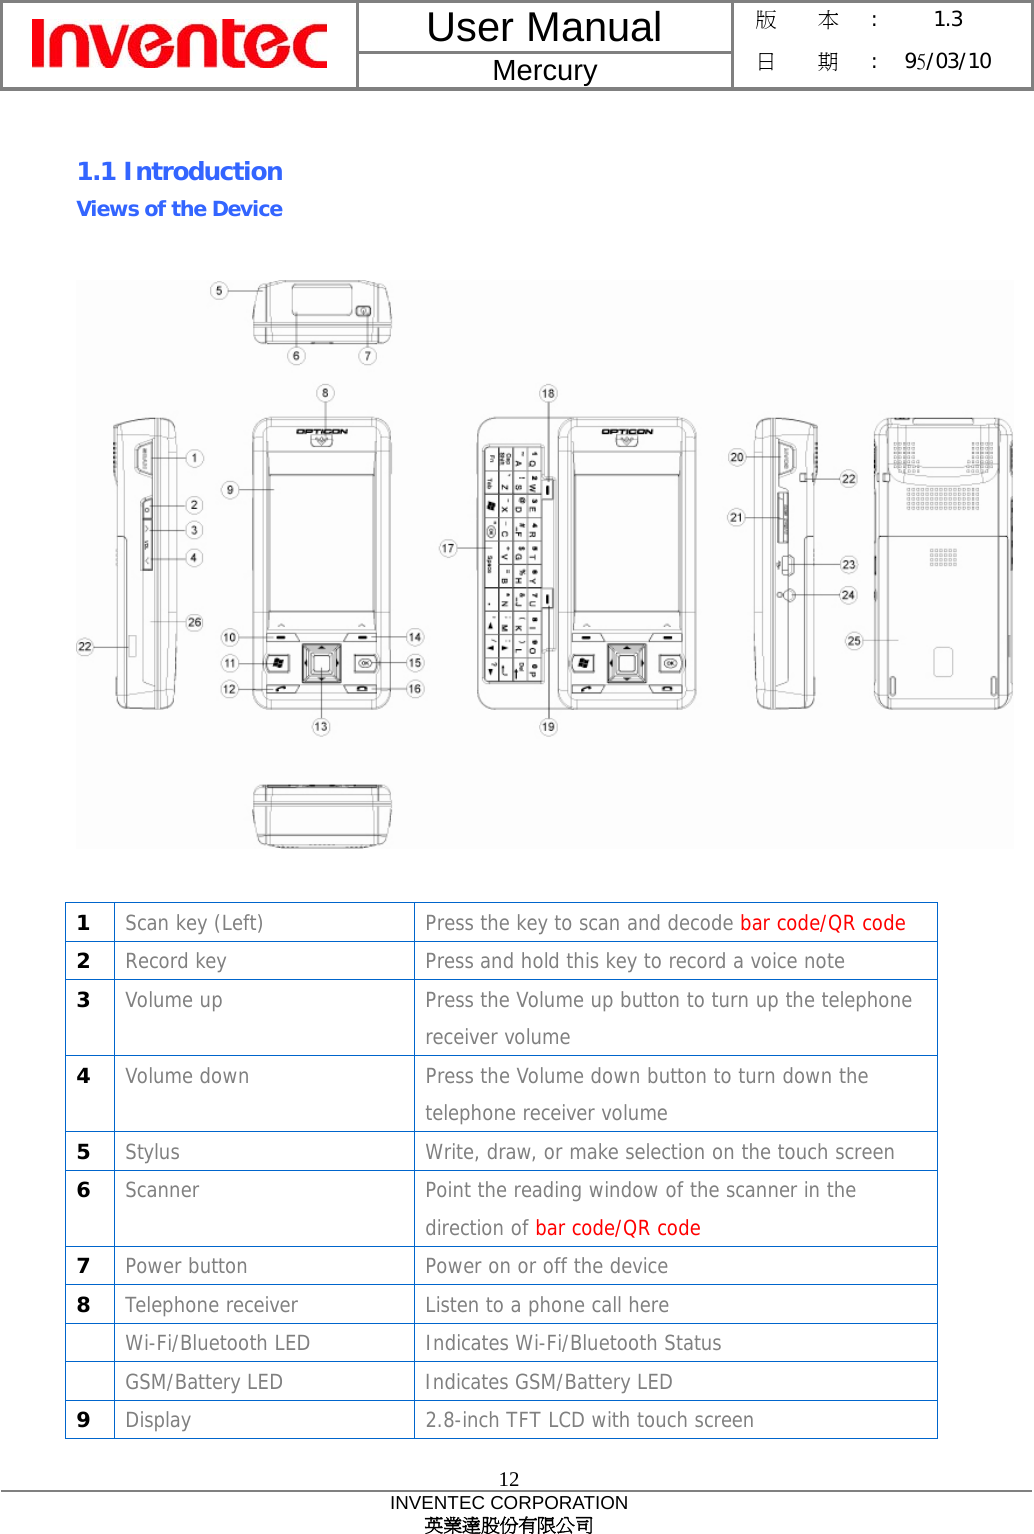 User Manual  Mercury 版    本 :  1.3 日    期 : 95/03/10  12 INVENTEC CORPORATION 英業達股份有限公司   1.1 Introduction Views of the Device    1  Scan key (Left)  Press the key to scan and decode bar code/QR code 2  Record key  Press and hold this key to record a voice note 3  Volume up  Press the Volume up button to turn up the telephone receiver volume 4  Volume down  Press the Volume down button to turn down the telephone receiver volume 5  Stylus  Write, draw, or make selection on the touch screen 6  Scanner  Point the reading window of the scanner in the direction of bar code/QR code 7  Power button  Power on or off the device 8  Telephone receiver  Listen to a phone call here  Wi-Fi/Bluetooth LED  Indicates Wi-Fi/Bluetooth Status  GSM/Battery LED  Indicates GSM/Battery LED 9  Display  2.8-inch TFT LCD with touch screen 